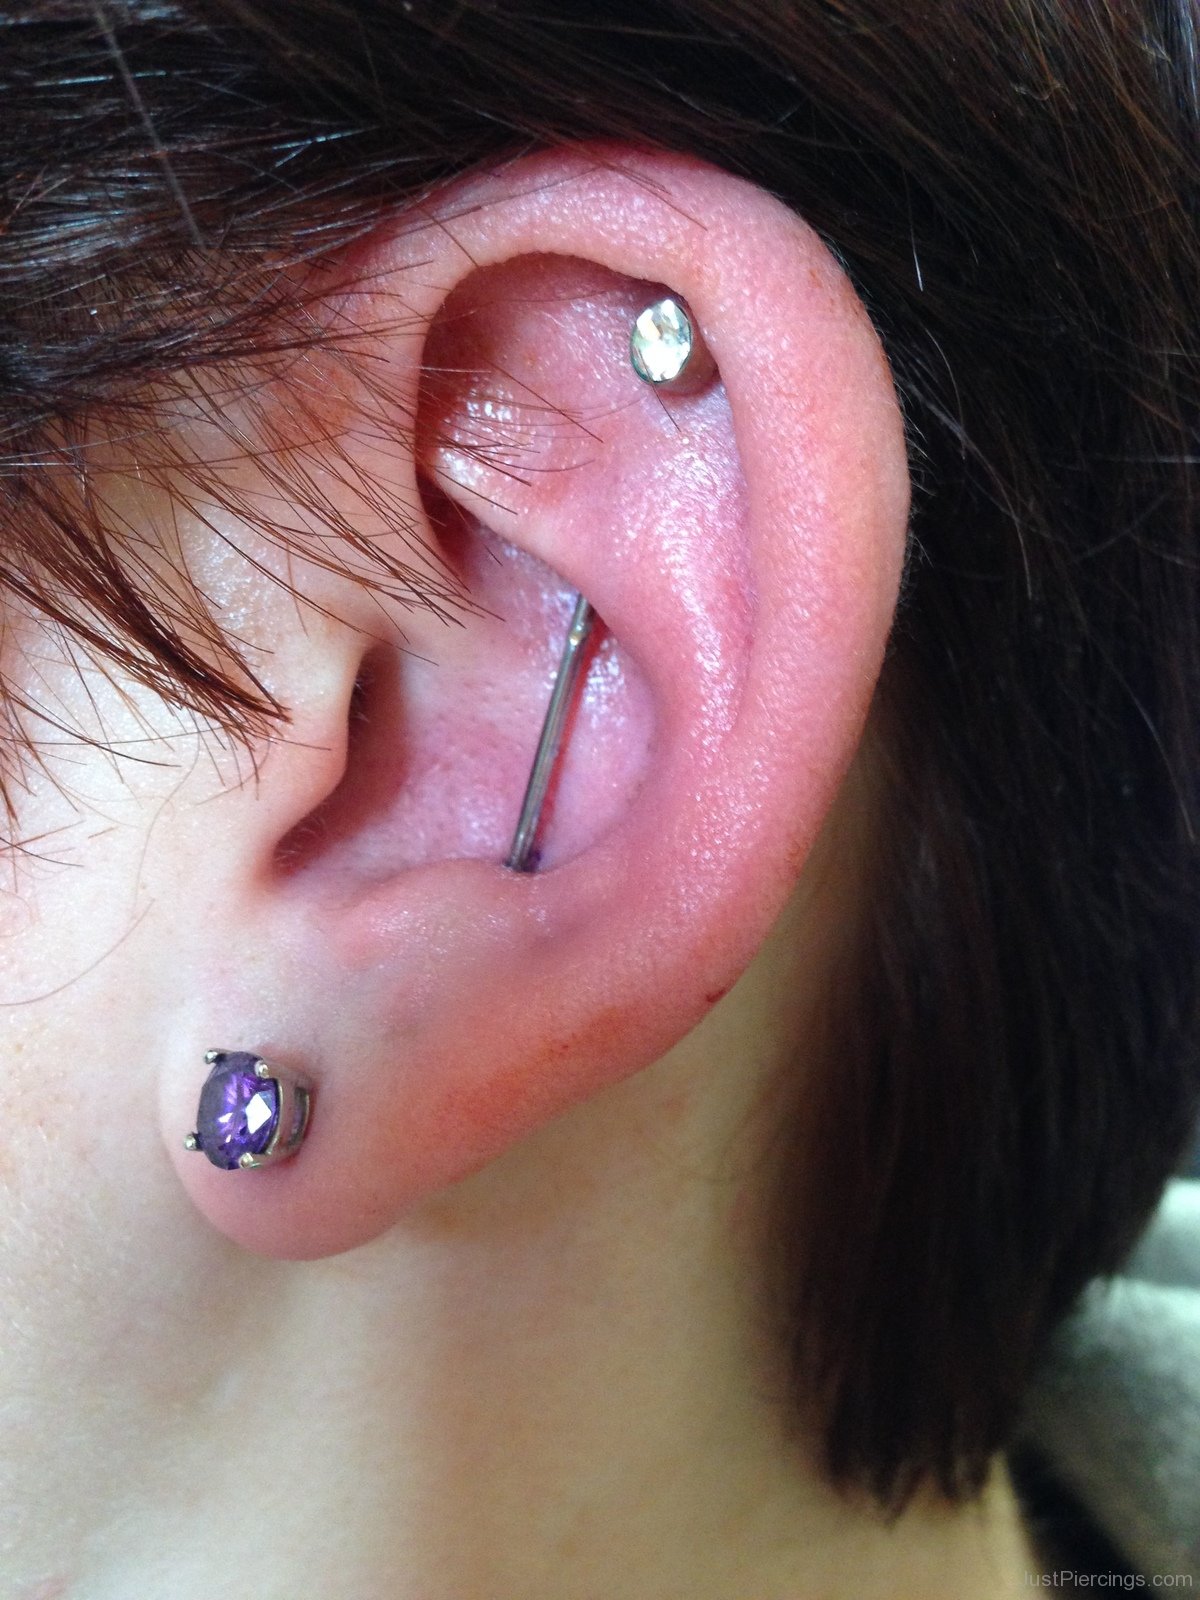 40+ Earlobe Piercing Pictures And Ideas.